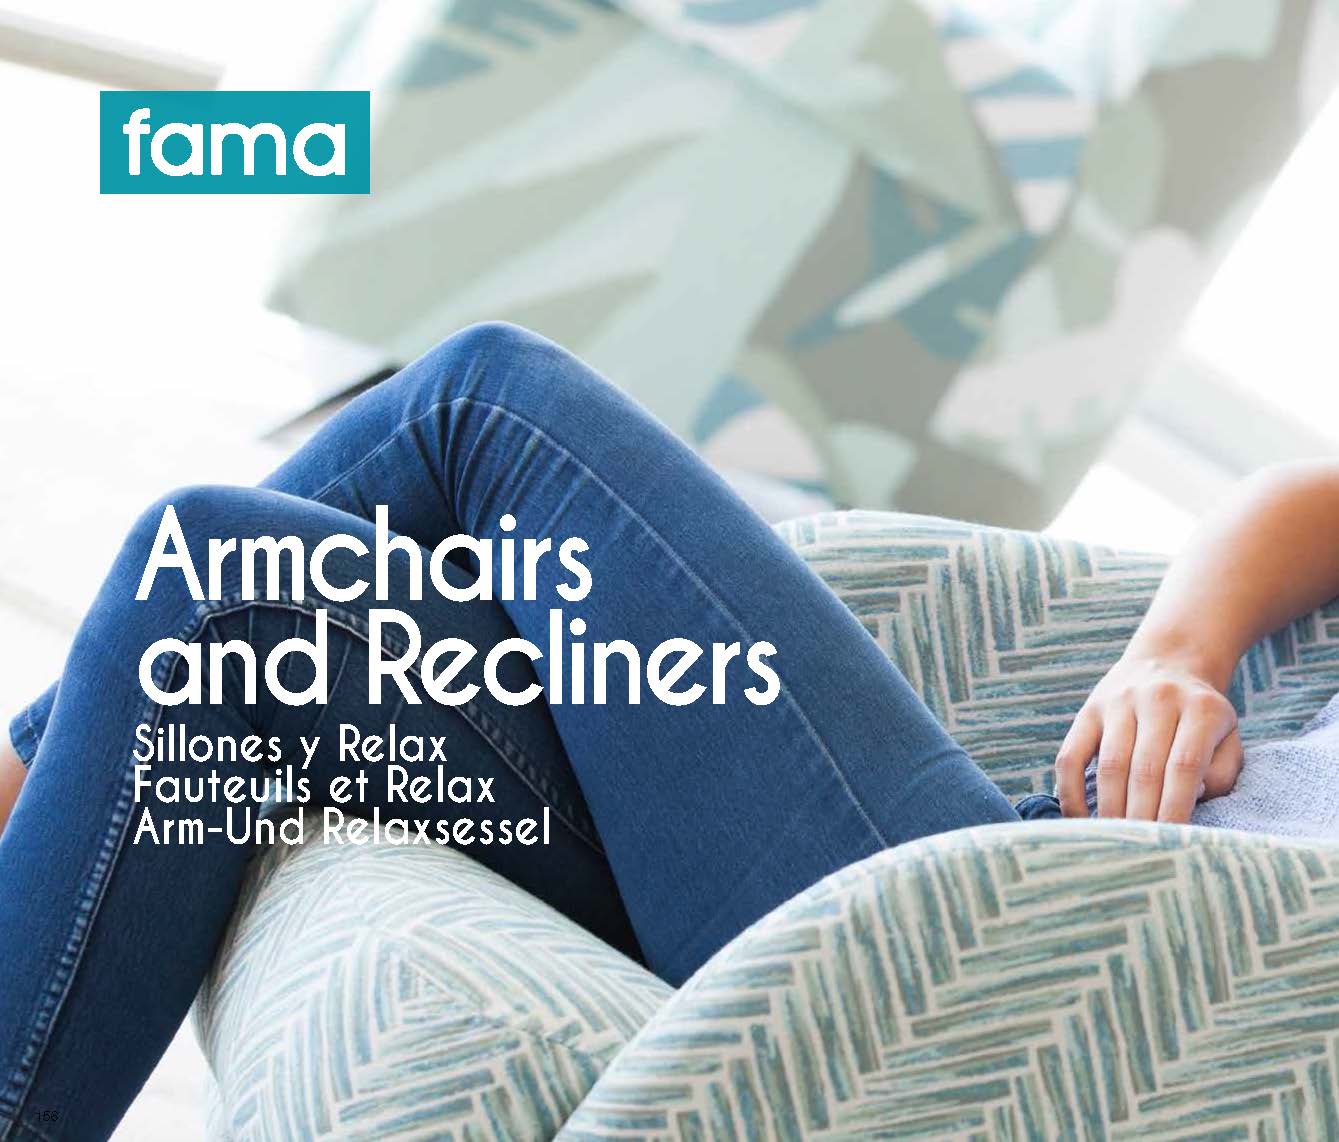 Brands Fama Modern Living Room, Spain Fama Armchairs & Recliners